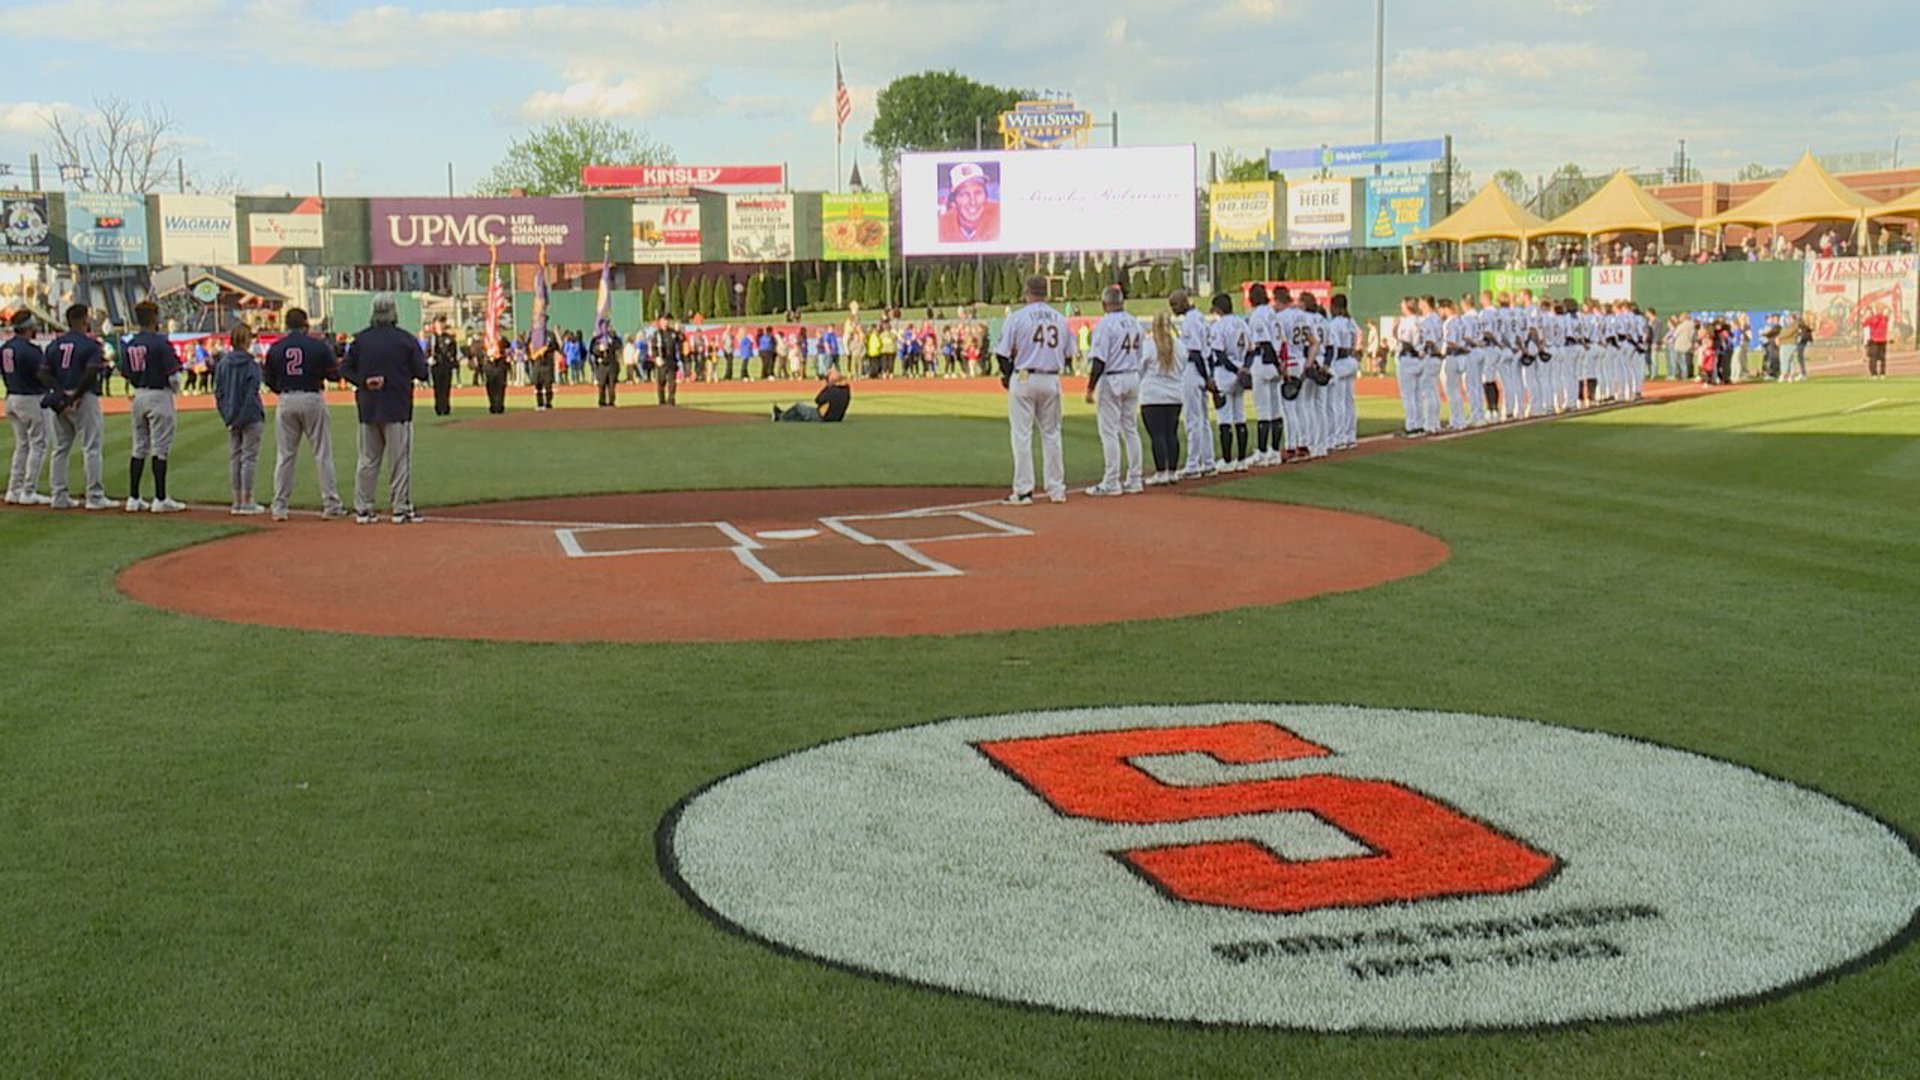 Fans show up for Revs season opener to honor the hall-of-fame baseball legend who helped bring pro baseball to York.